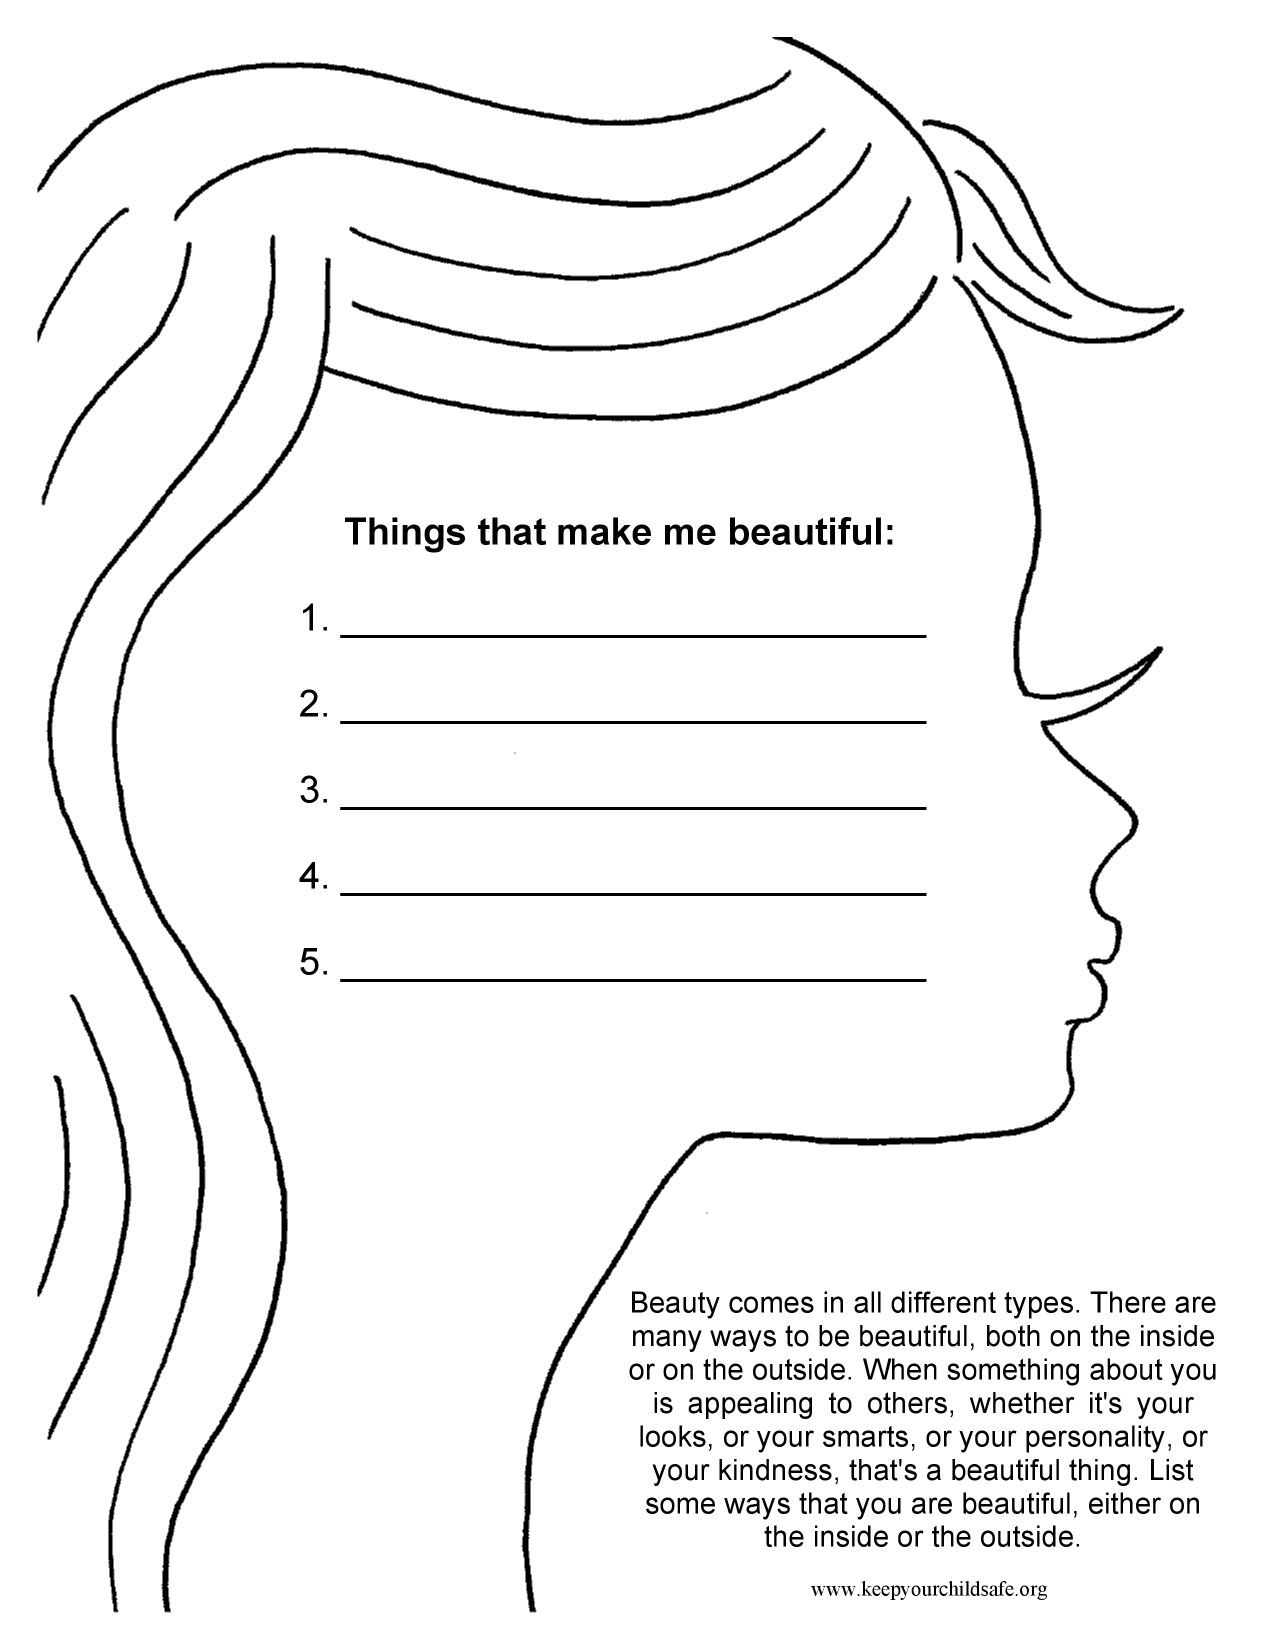 free-printable-art-therapy-worksheets